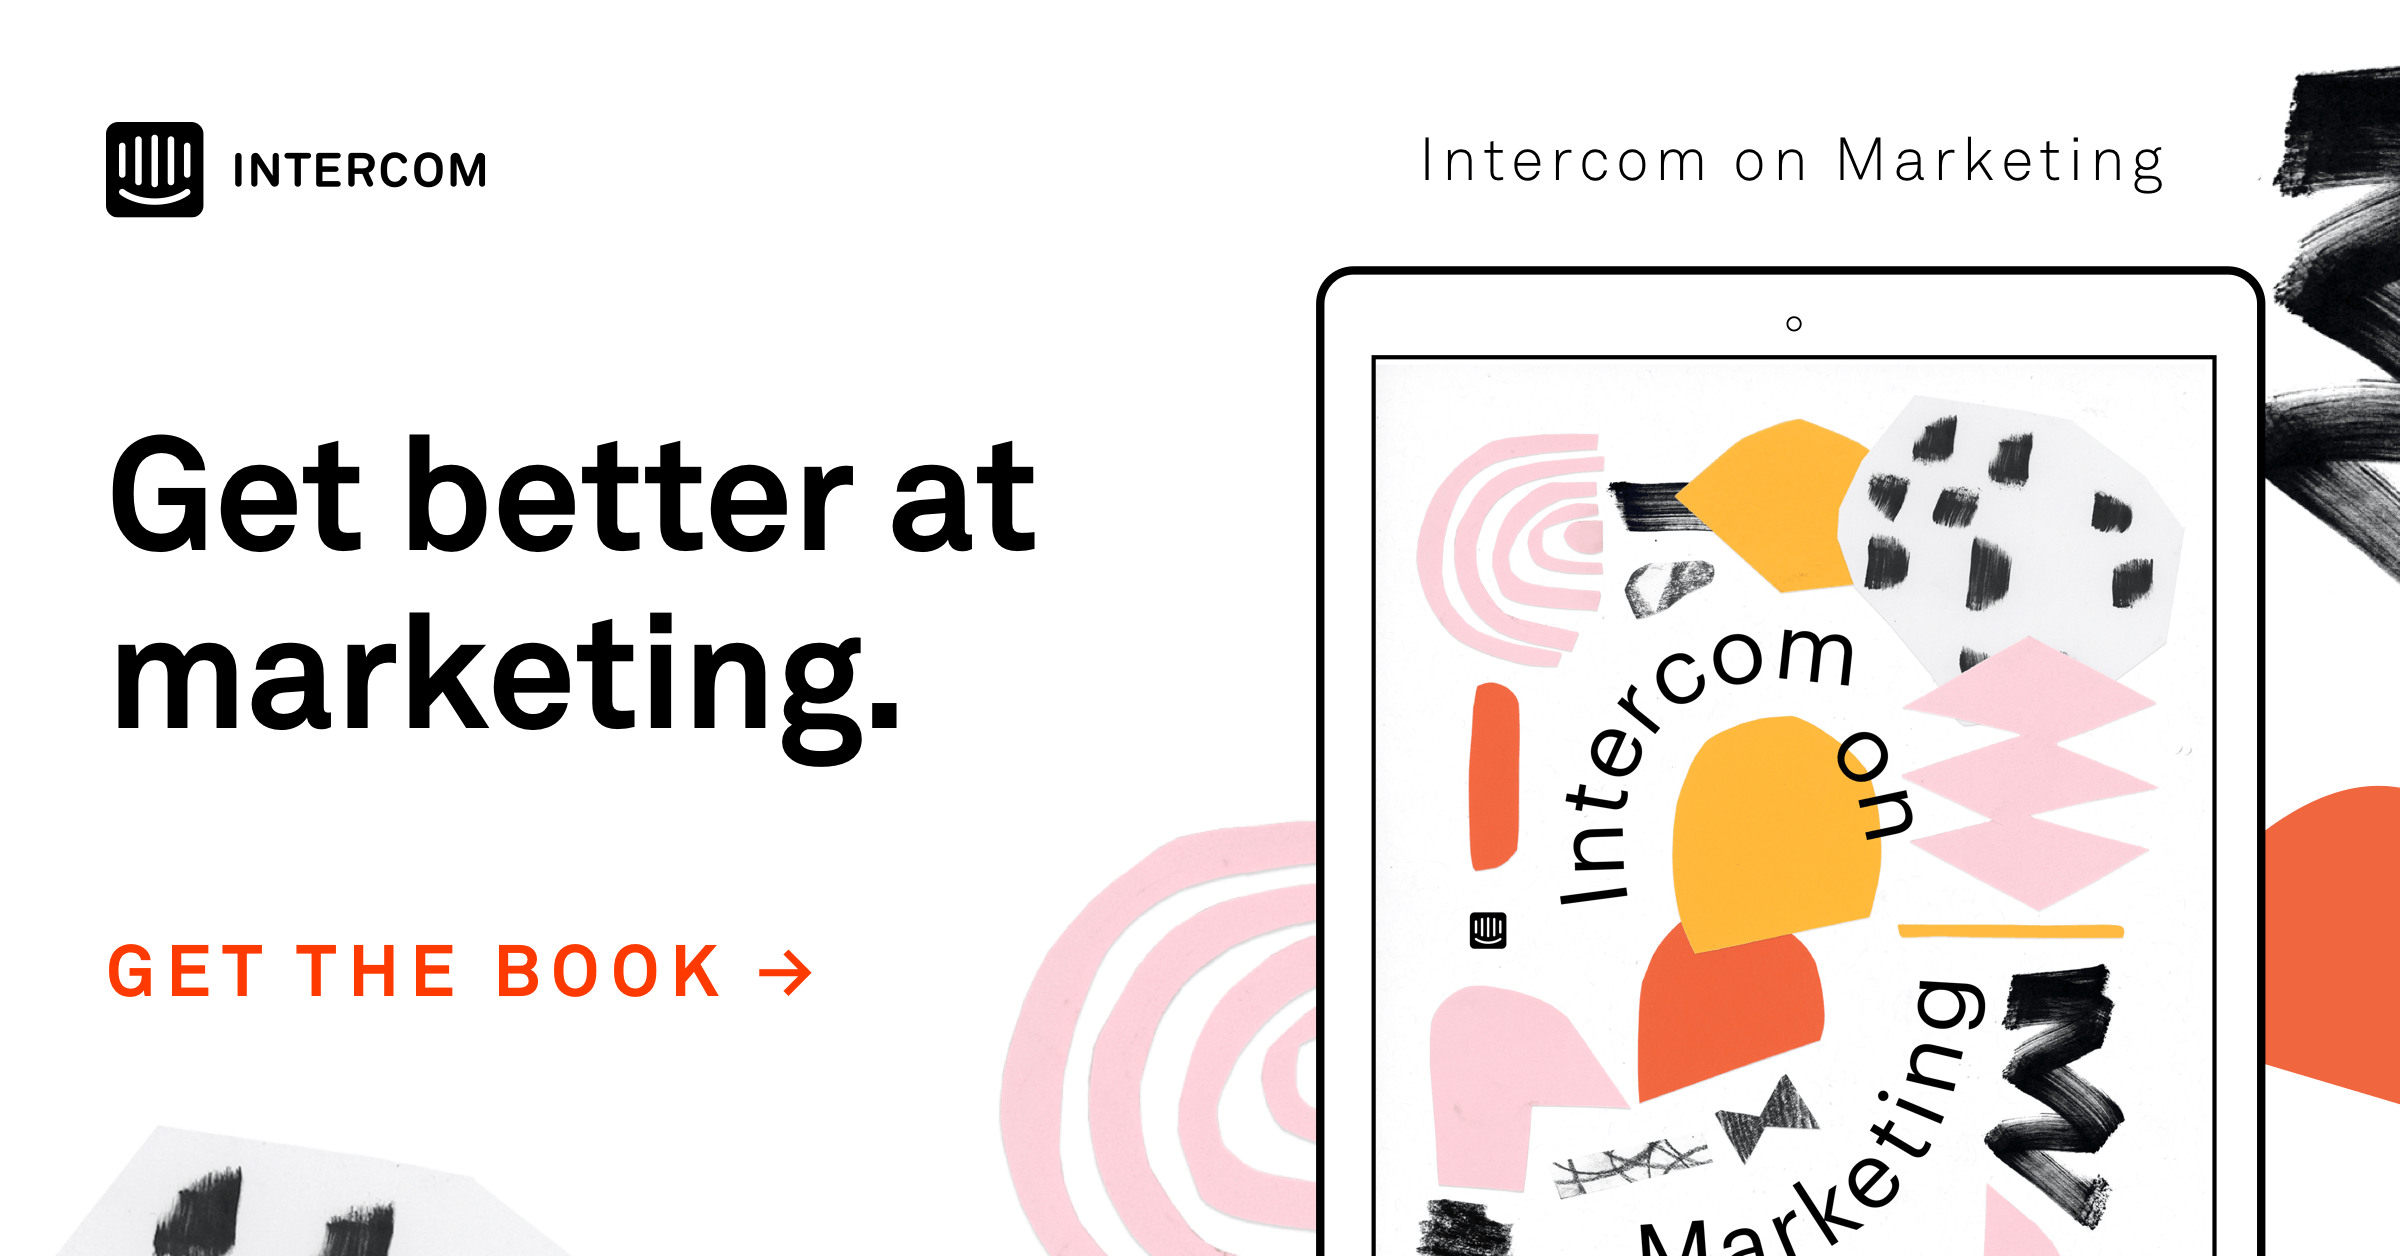 Download our book Intercom on Marketing